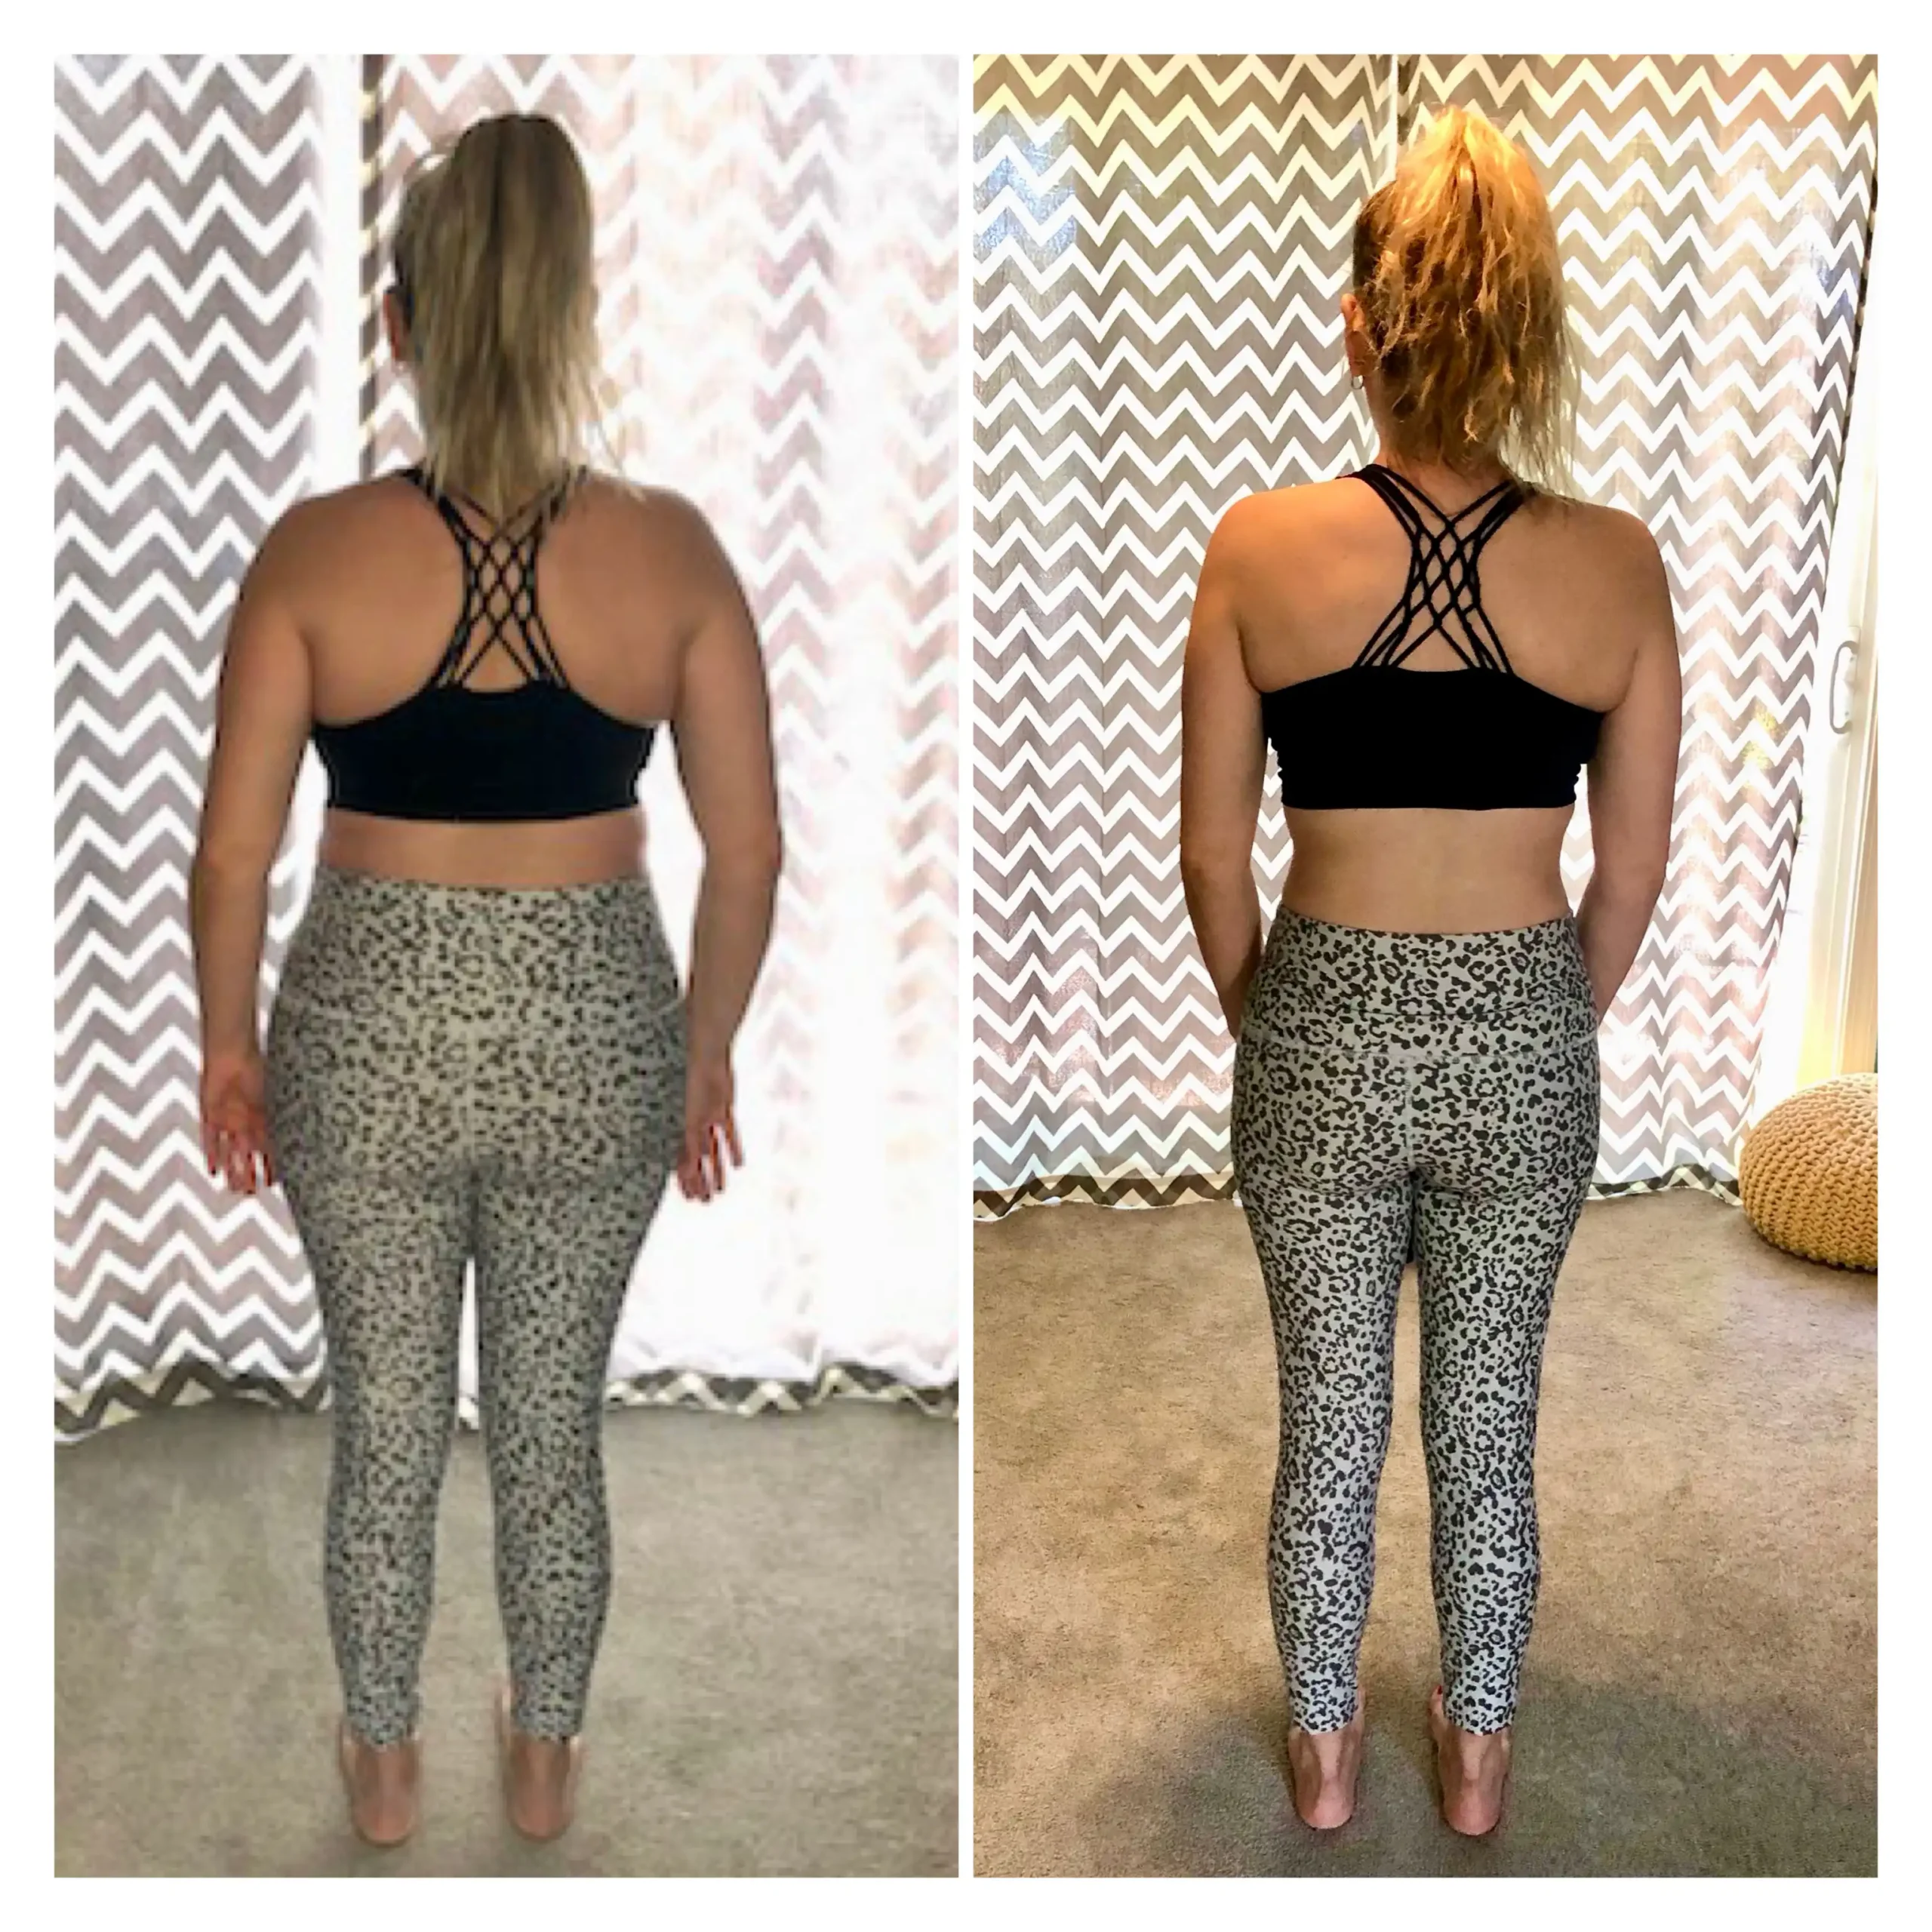 Sarah before and after weight loss back view